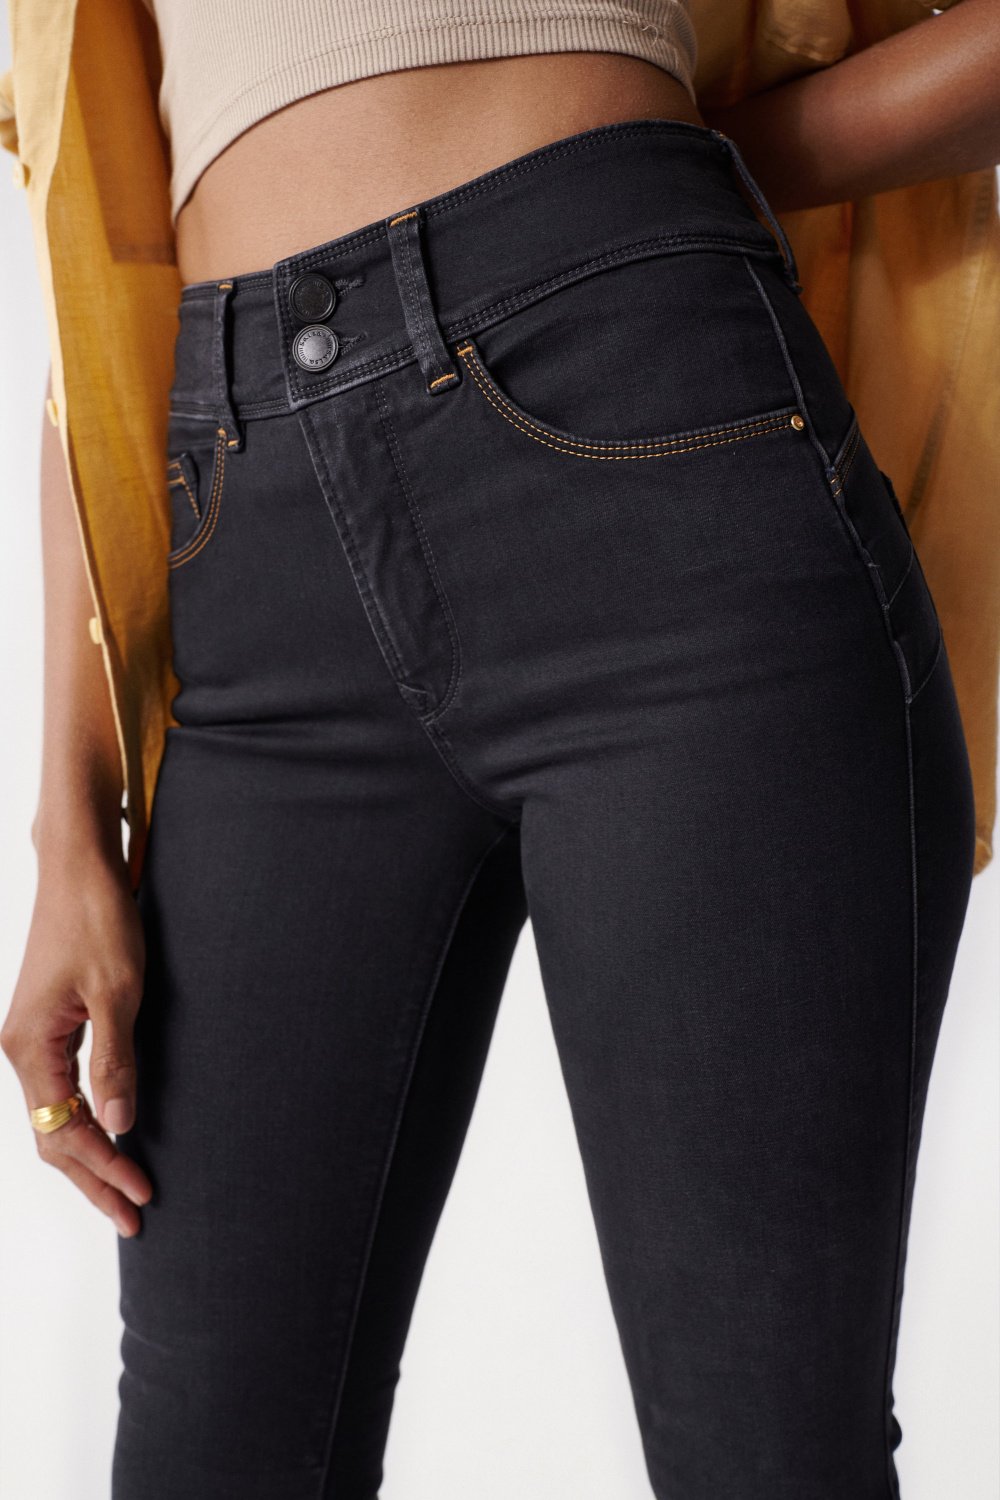 SKINNY PUSH IN SECRET JEANS WITH SHINE DETAIL - Salsa